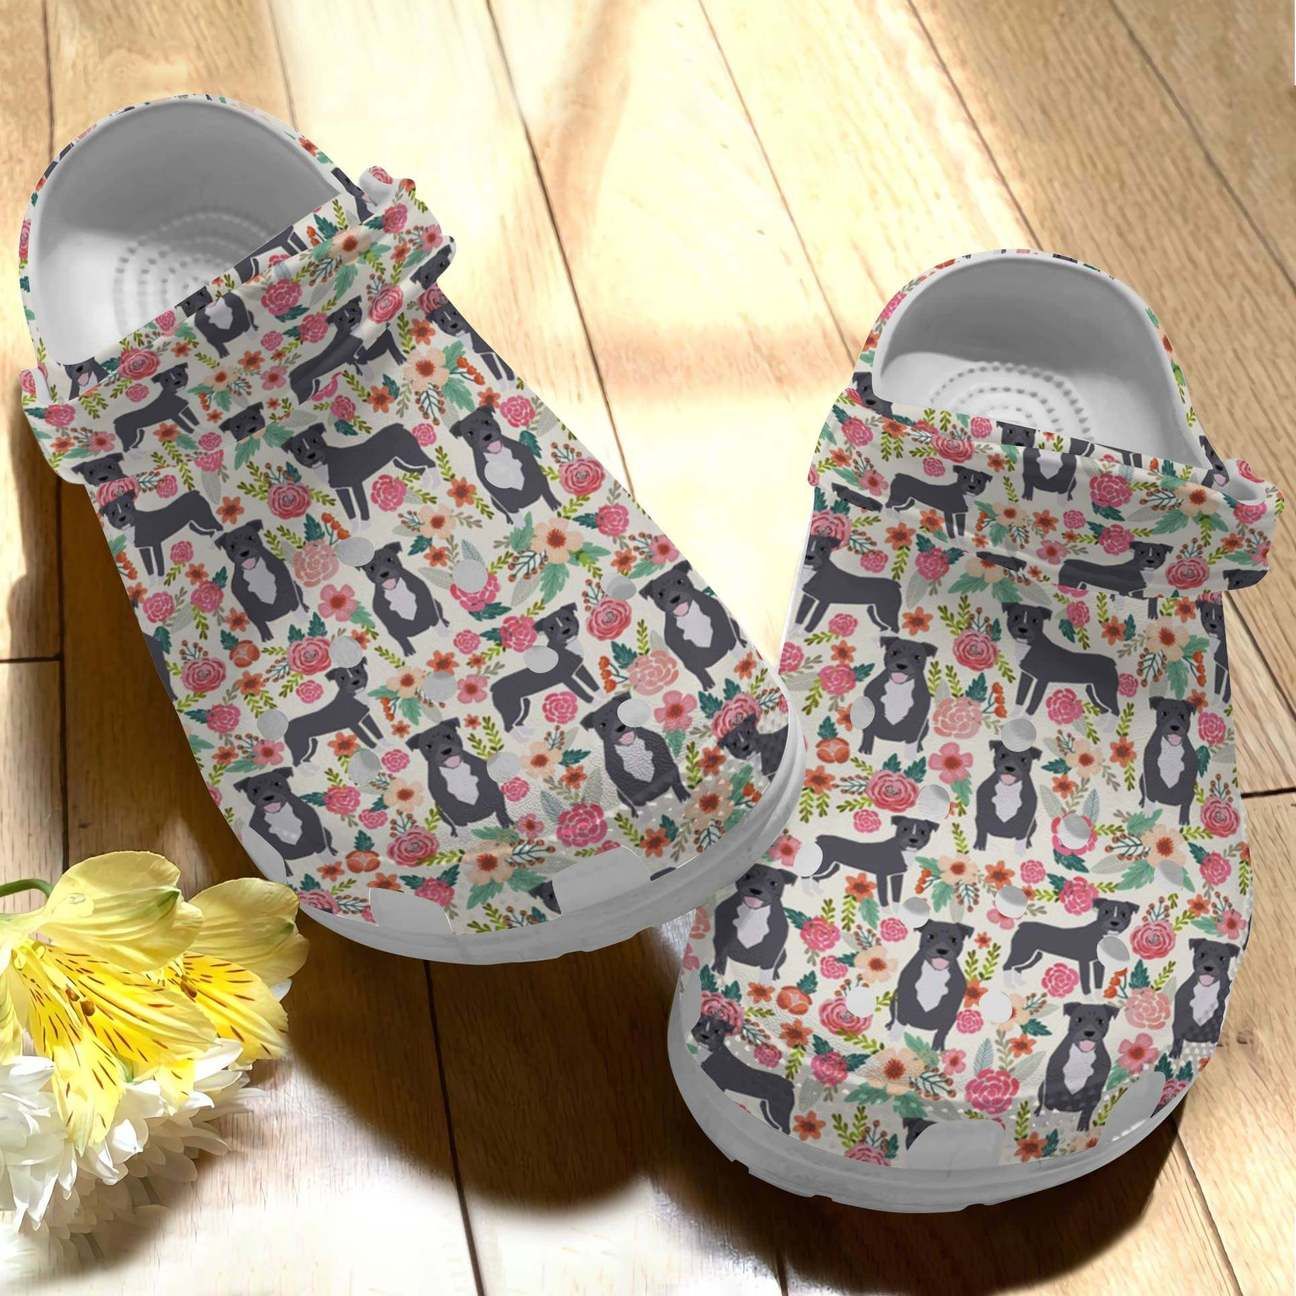 Pitbull Personalize Clog Custom Crocs Fashionstyle Comfortable For Women Men Kid Print 3D Whitesole Floral Dogs